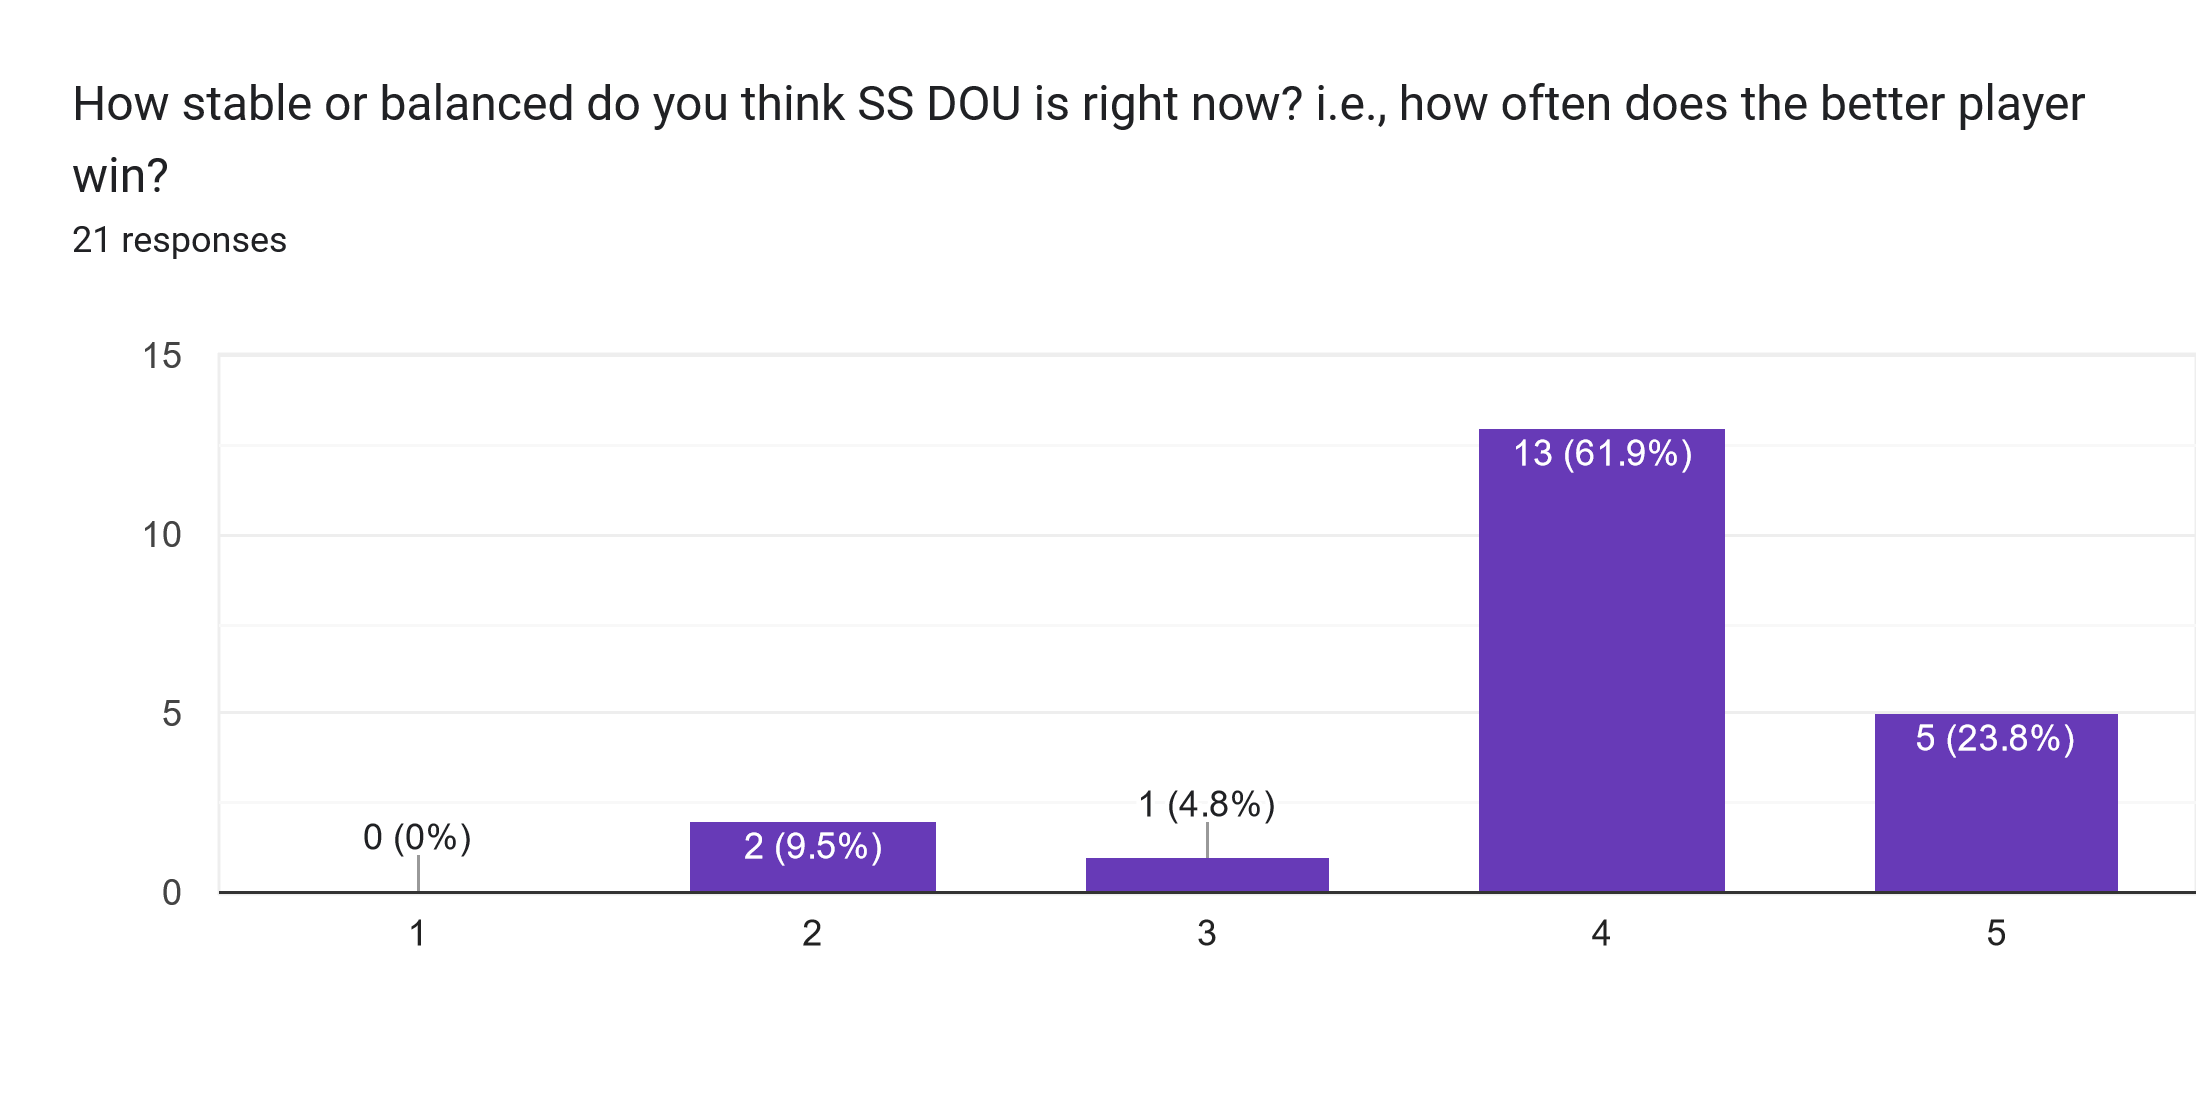 Forms response chart. Question title: How stable or balanced do you think SS DOU is right now? i.e., how often does the better player win?. Number of responses: 21 responses.